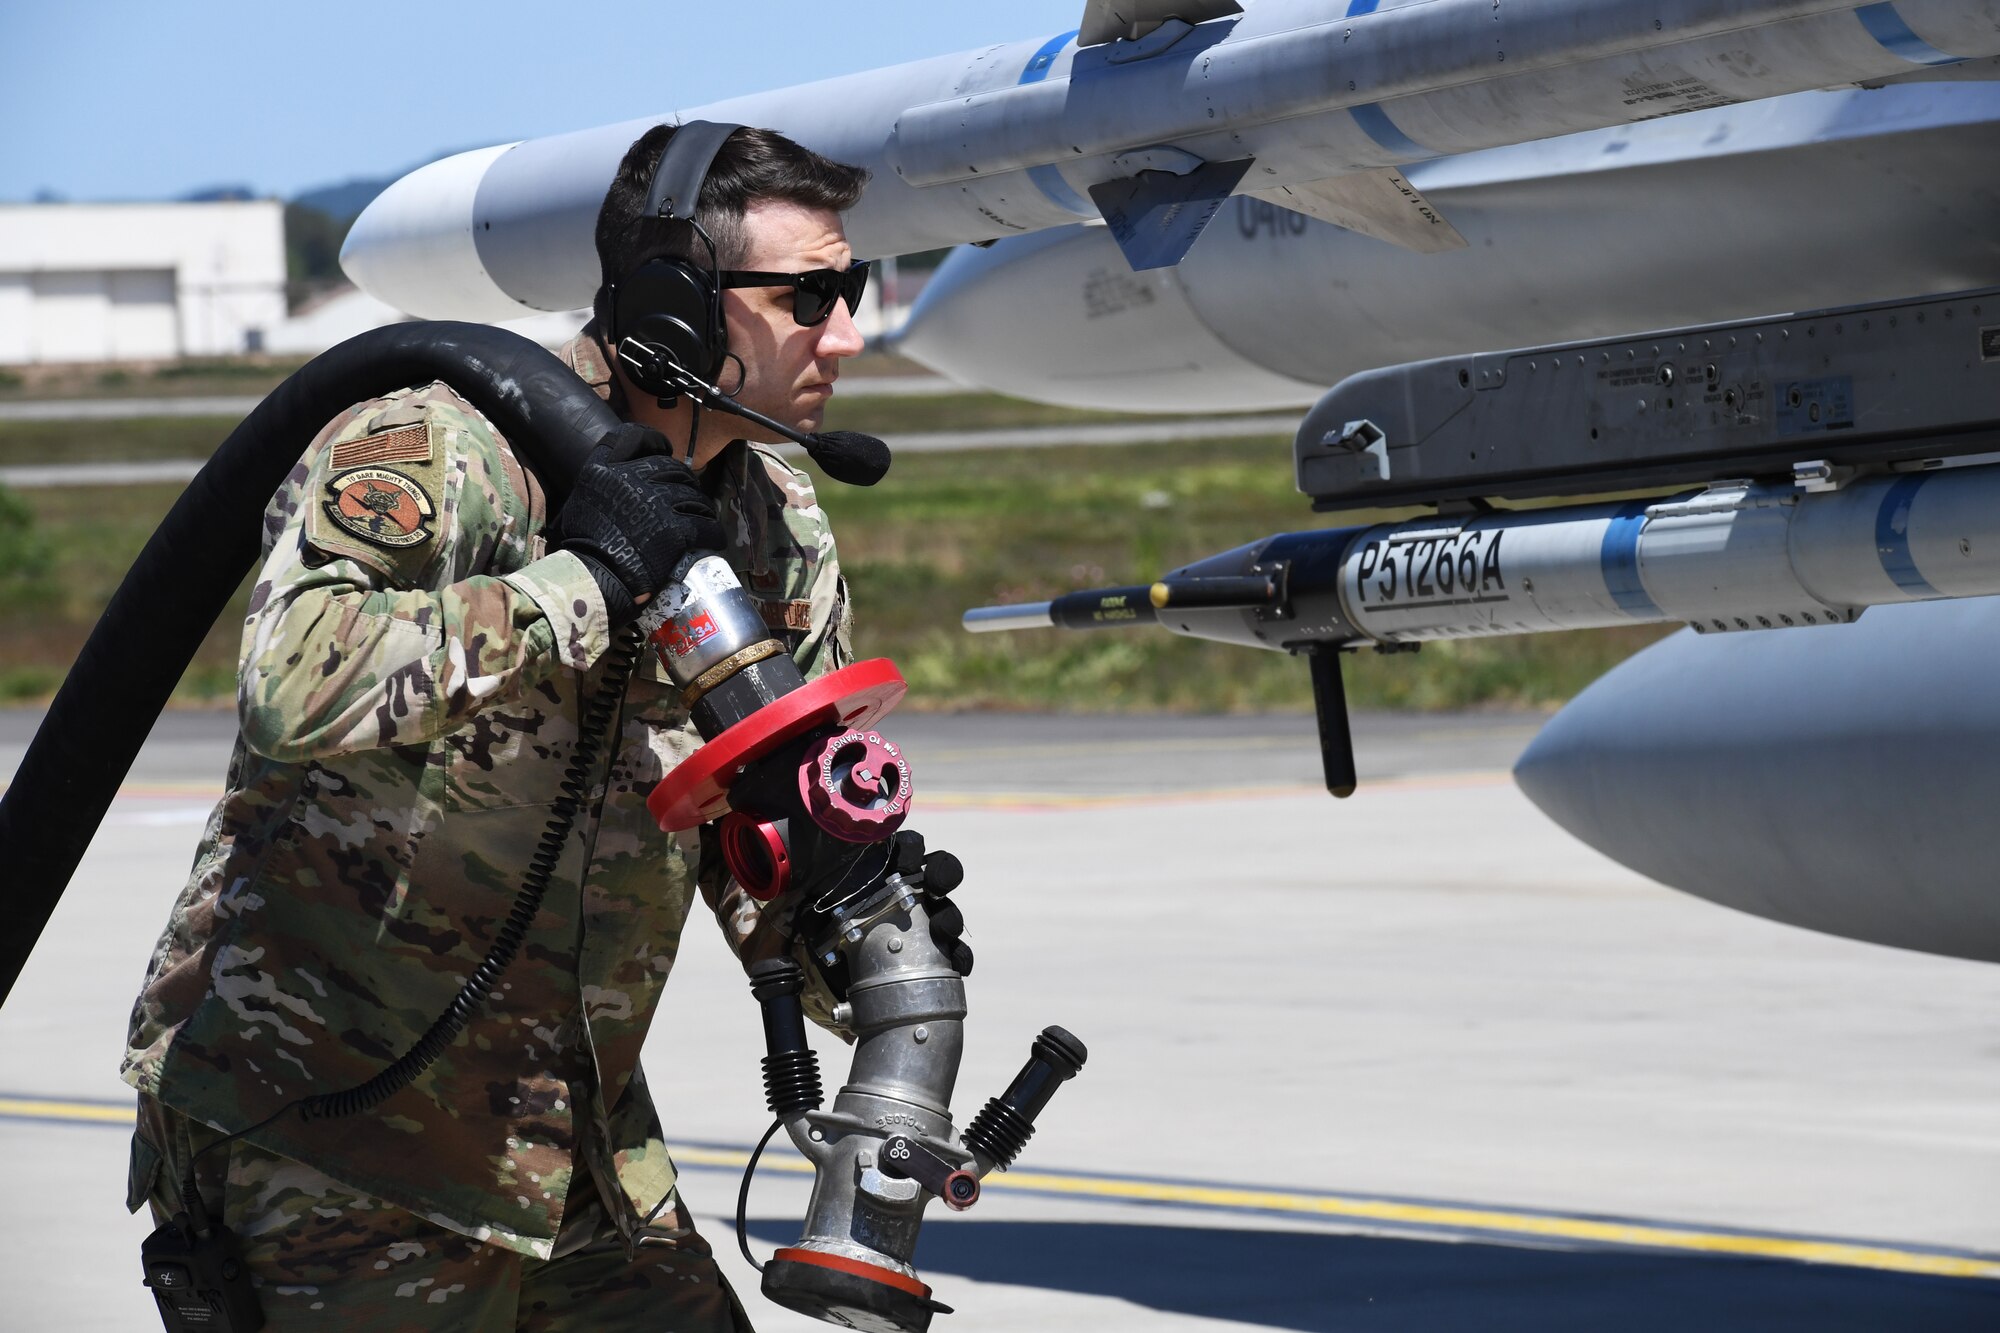 U.S. Air Force Master Sgt. Jayson Lyons, 435th Contigency Response Group readiness and training flight chief, brings a fuel hose to an F-16 Fighting Falcon during Exercise Agile Wolf at Ramstein Air Base, Germany, May 28, 2020. The exercise tested the ability to perform a "hot-pit refuel" during a contingency operation. (U.S. Air Force photo by Airman 1st Class Alison Stewart)